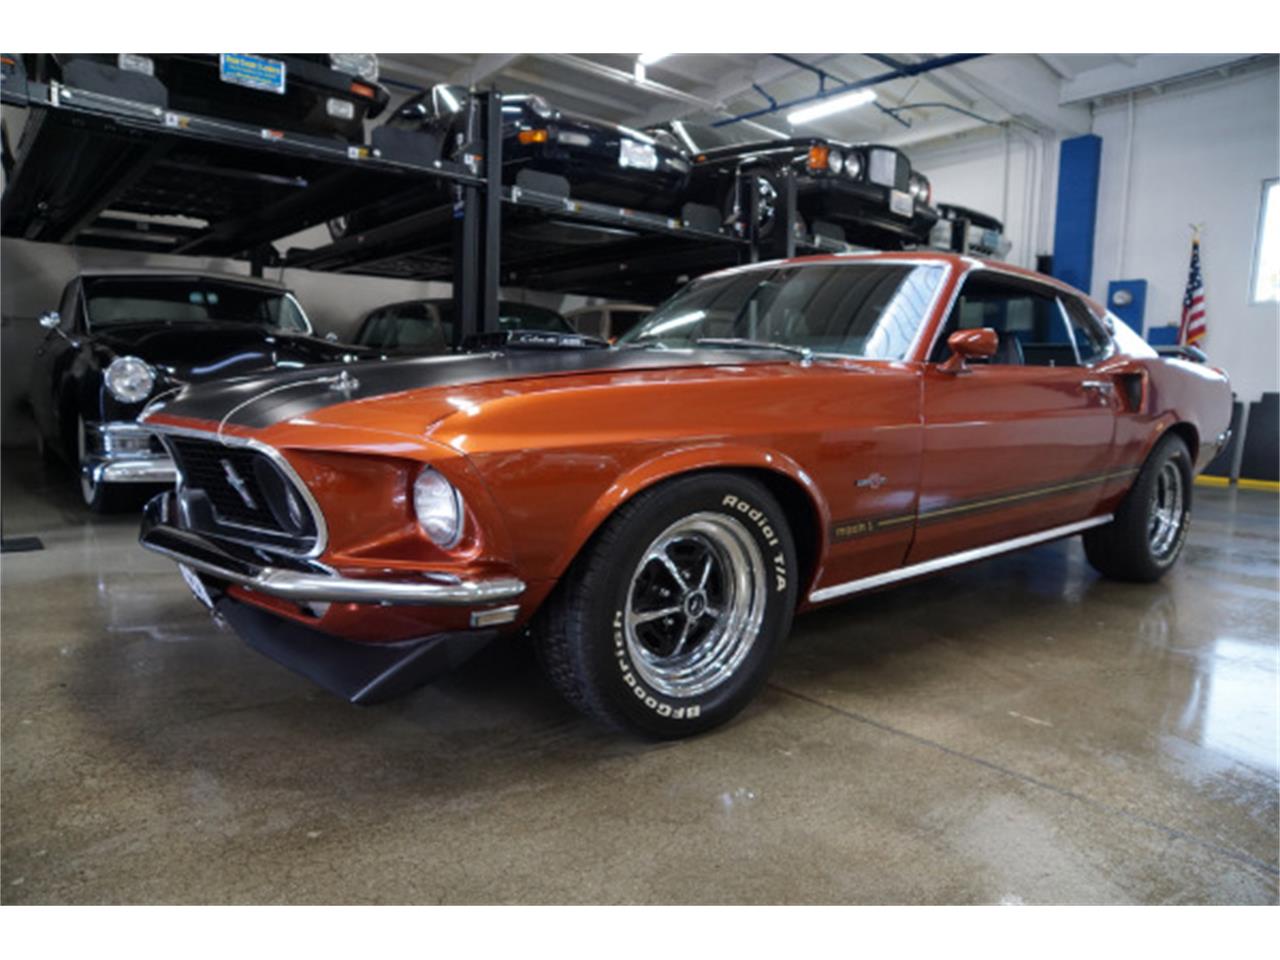 1969 Ford Mustang Mach 1 for Sale | ClassicCars.com | CC-1316137